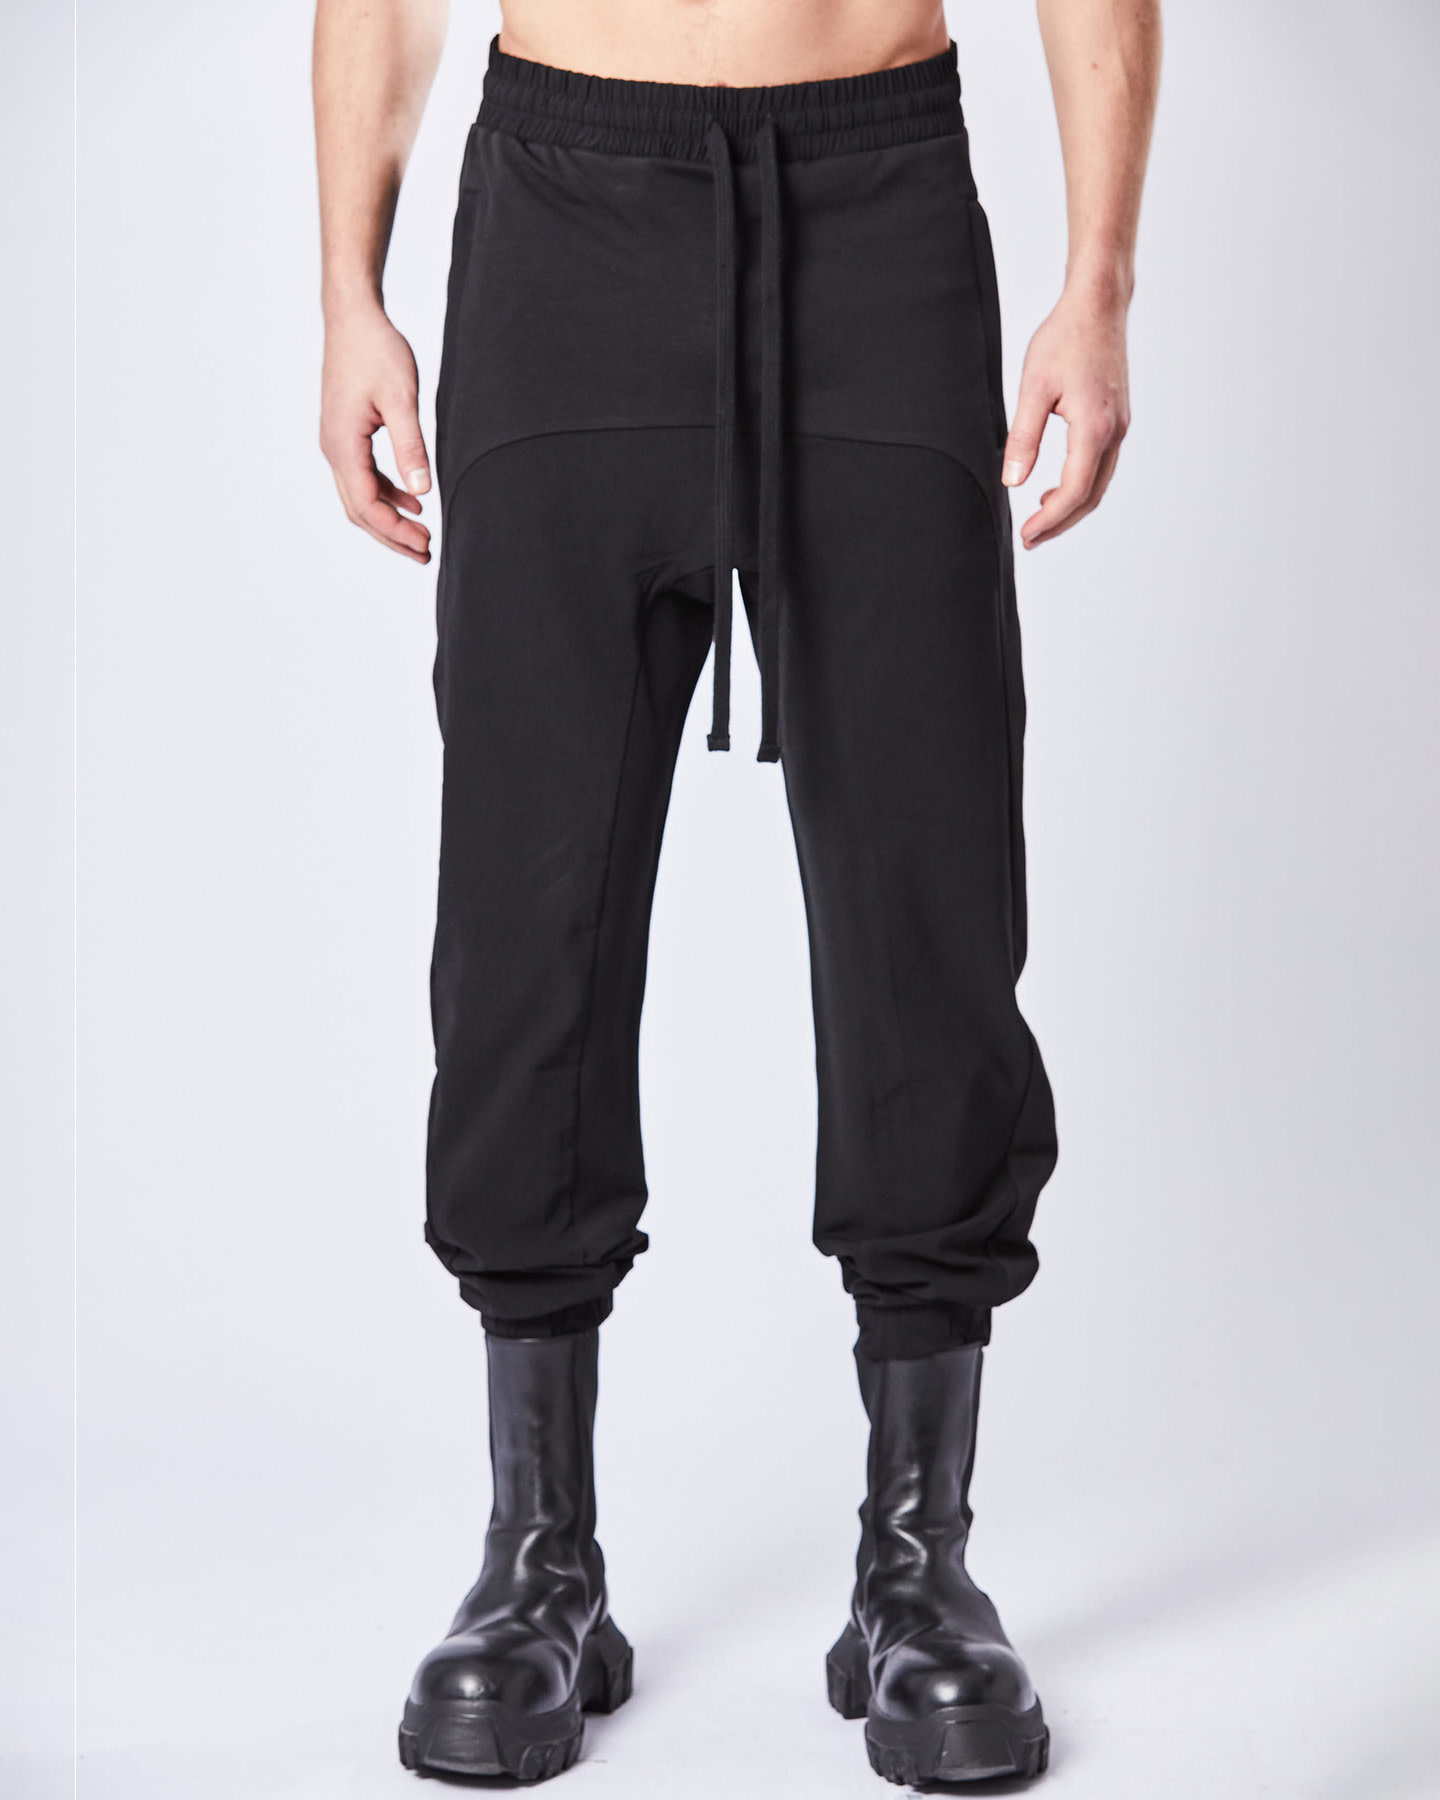 CURVED CONTRAST PANEL STRETCH JOGGER - BLACK